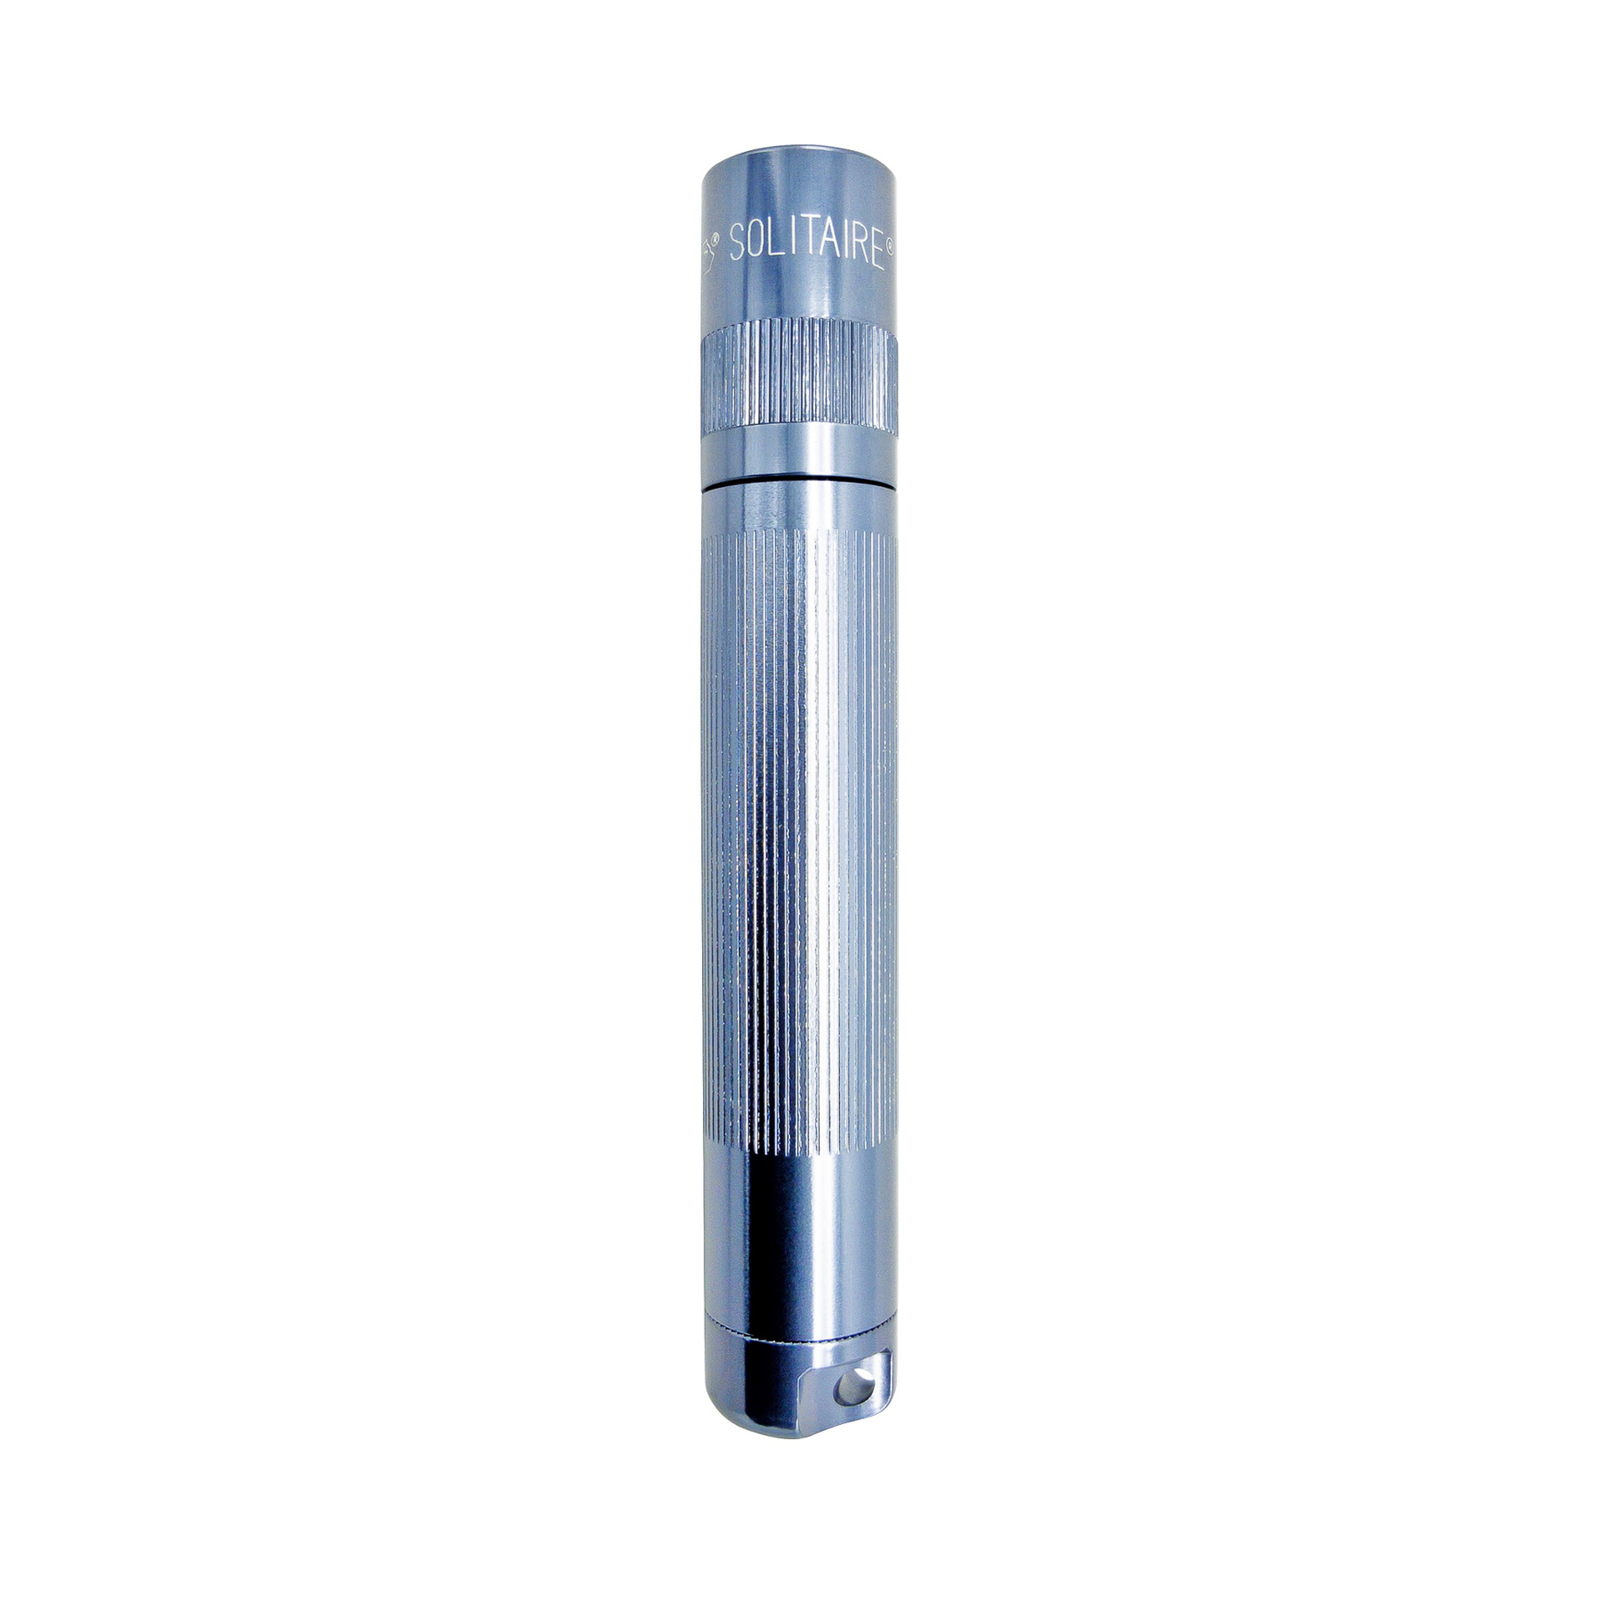 Maglite zaklamp Solitaire 1 Cell AAA, box, grijs